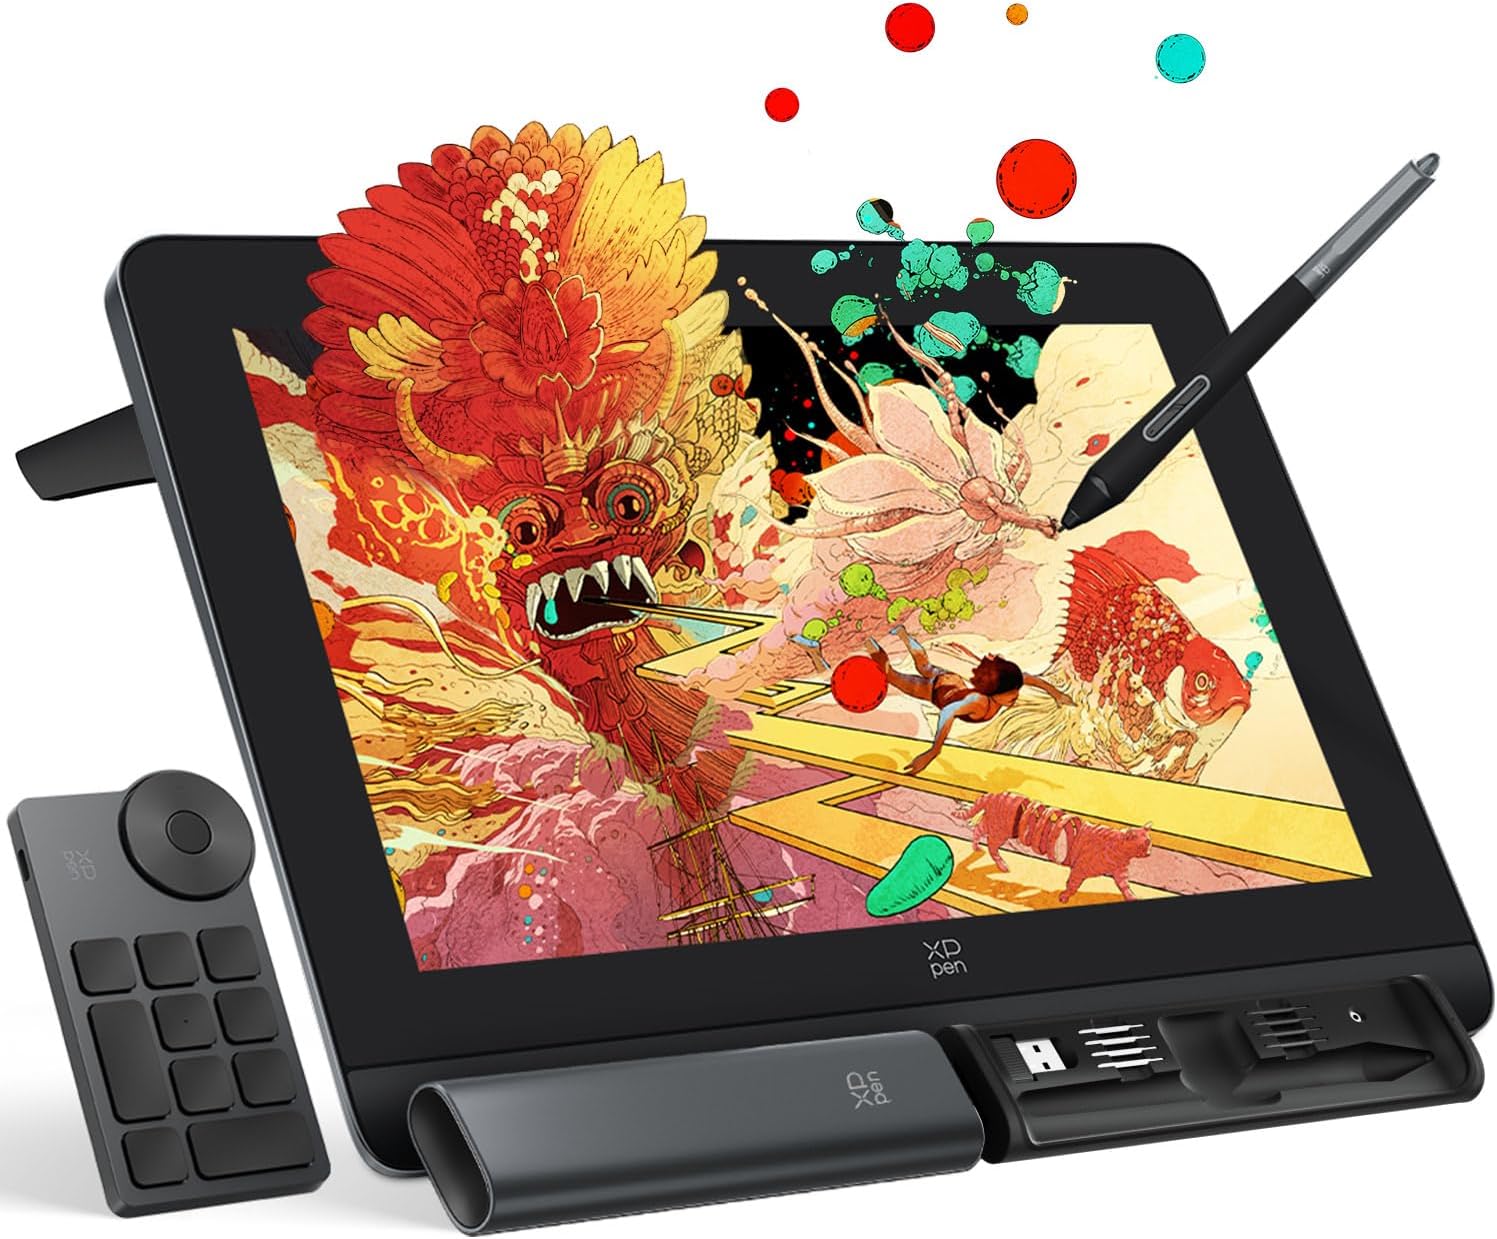 Time-Limited Discounts! XPPen Artist Pro 14 Gen2 Drawing Tablet with Screen - Grab Yours Before It's Gone!